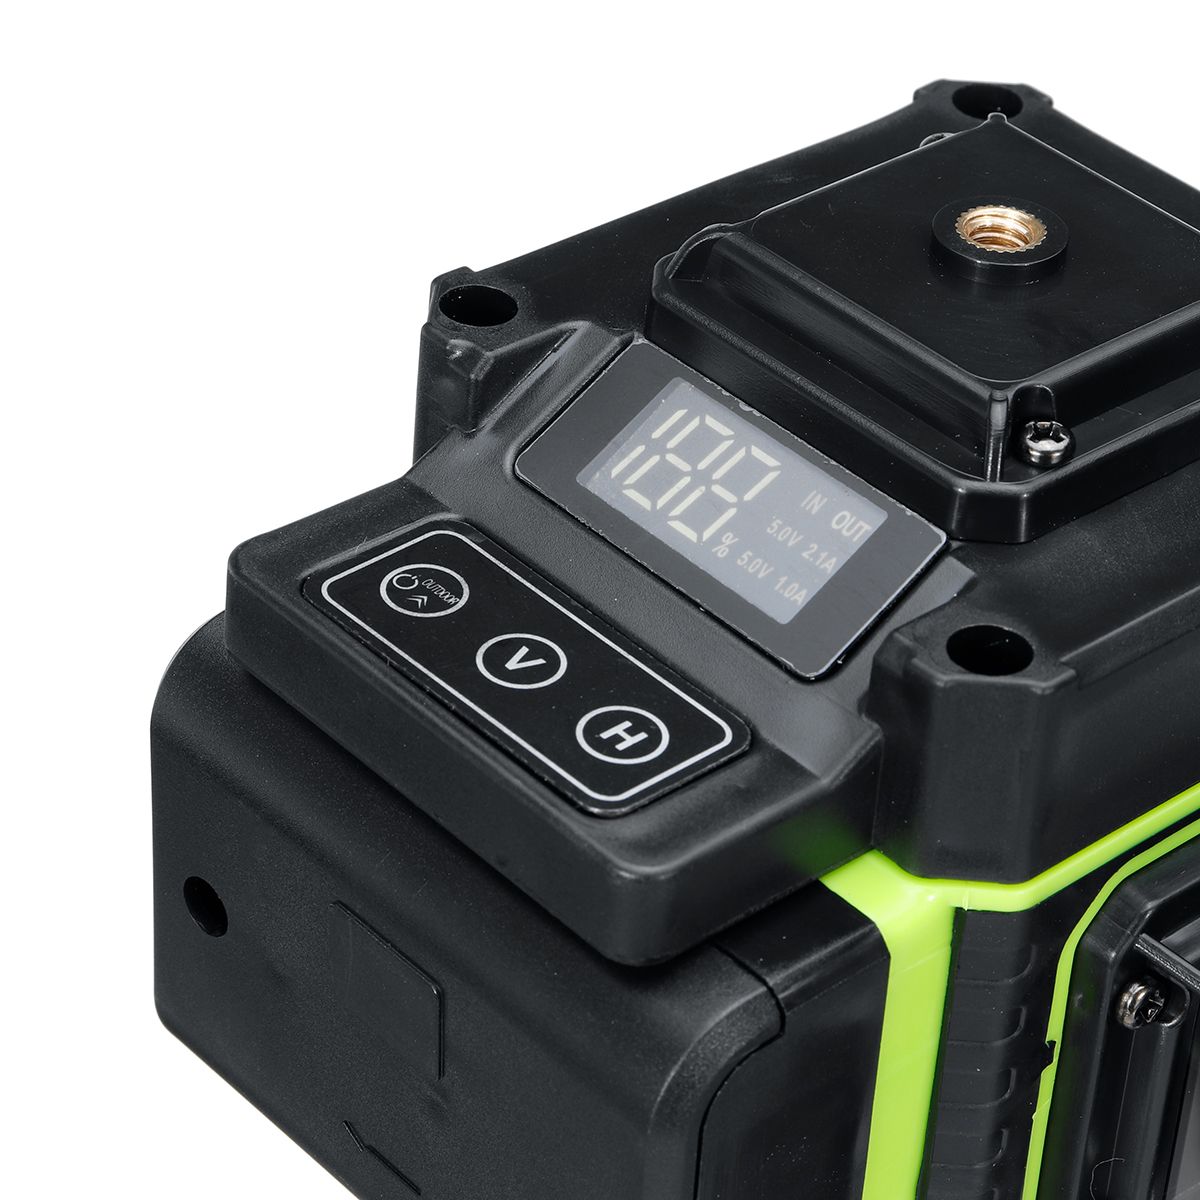 12-Blue-Lines-Laser-Level-Measuring-DevicesLine-360-Degree-Rotary-Horizontal-And-Vertical-Cross-Lase-1545640